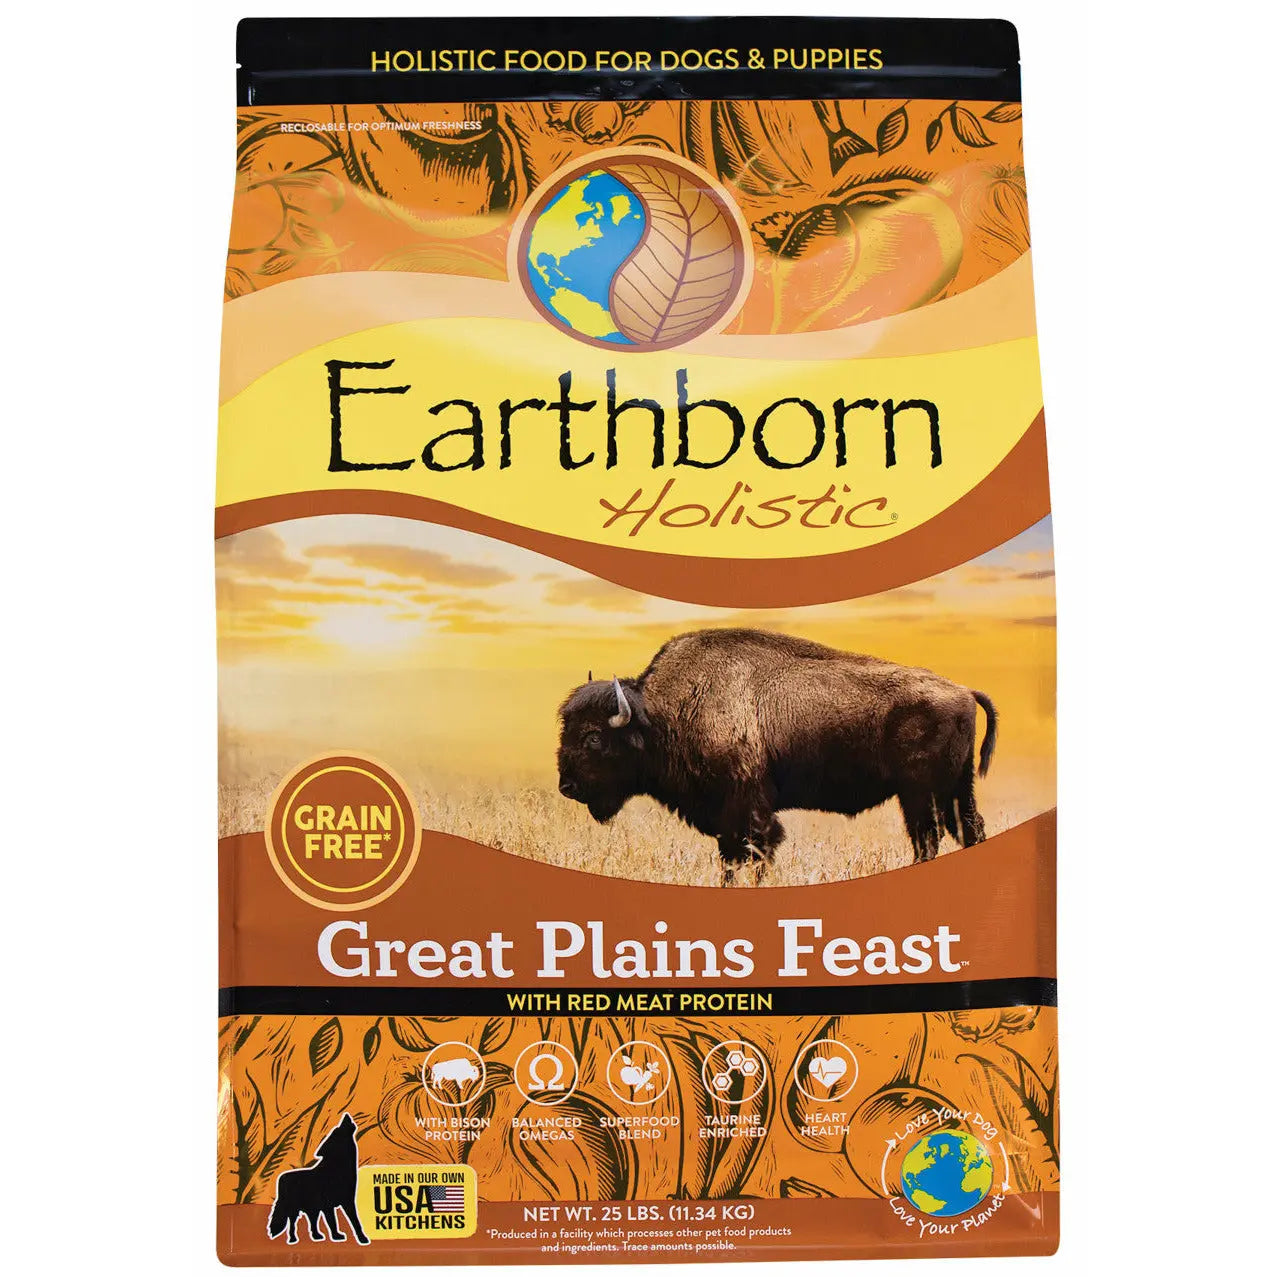 Earthborn Holistic® Grain Free Great Plains Feast with Bison Meal Earthborn Holistic®